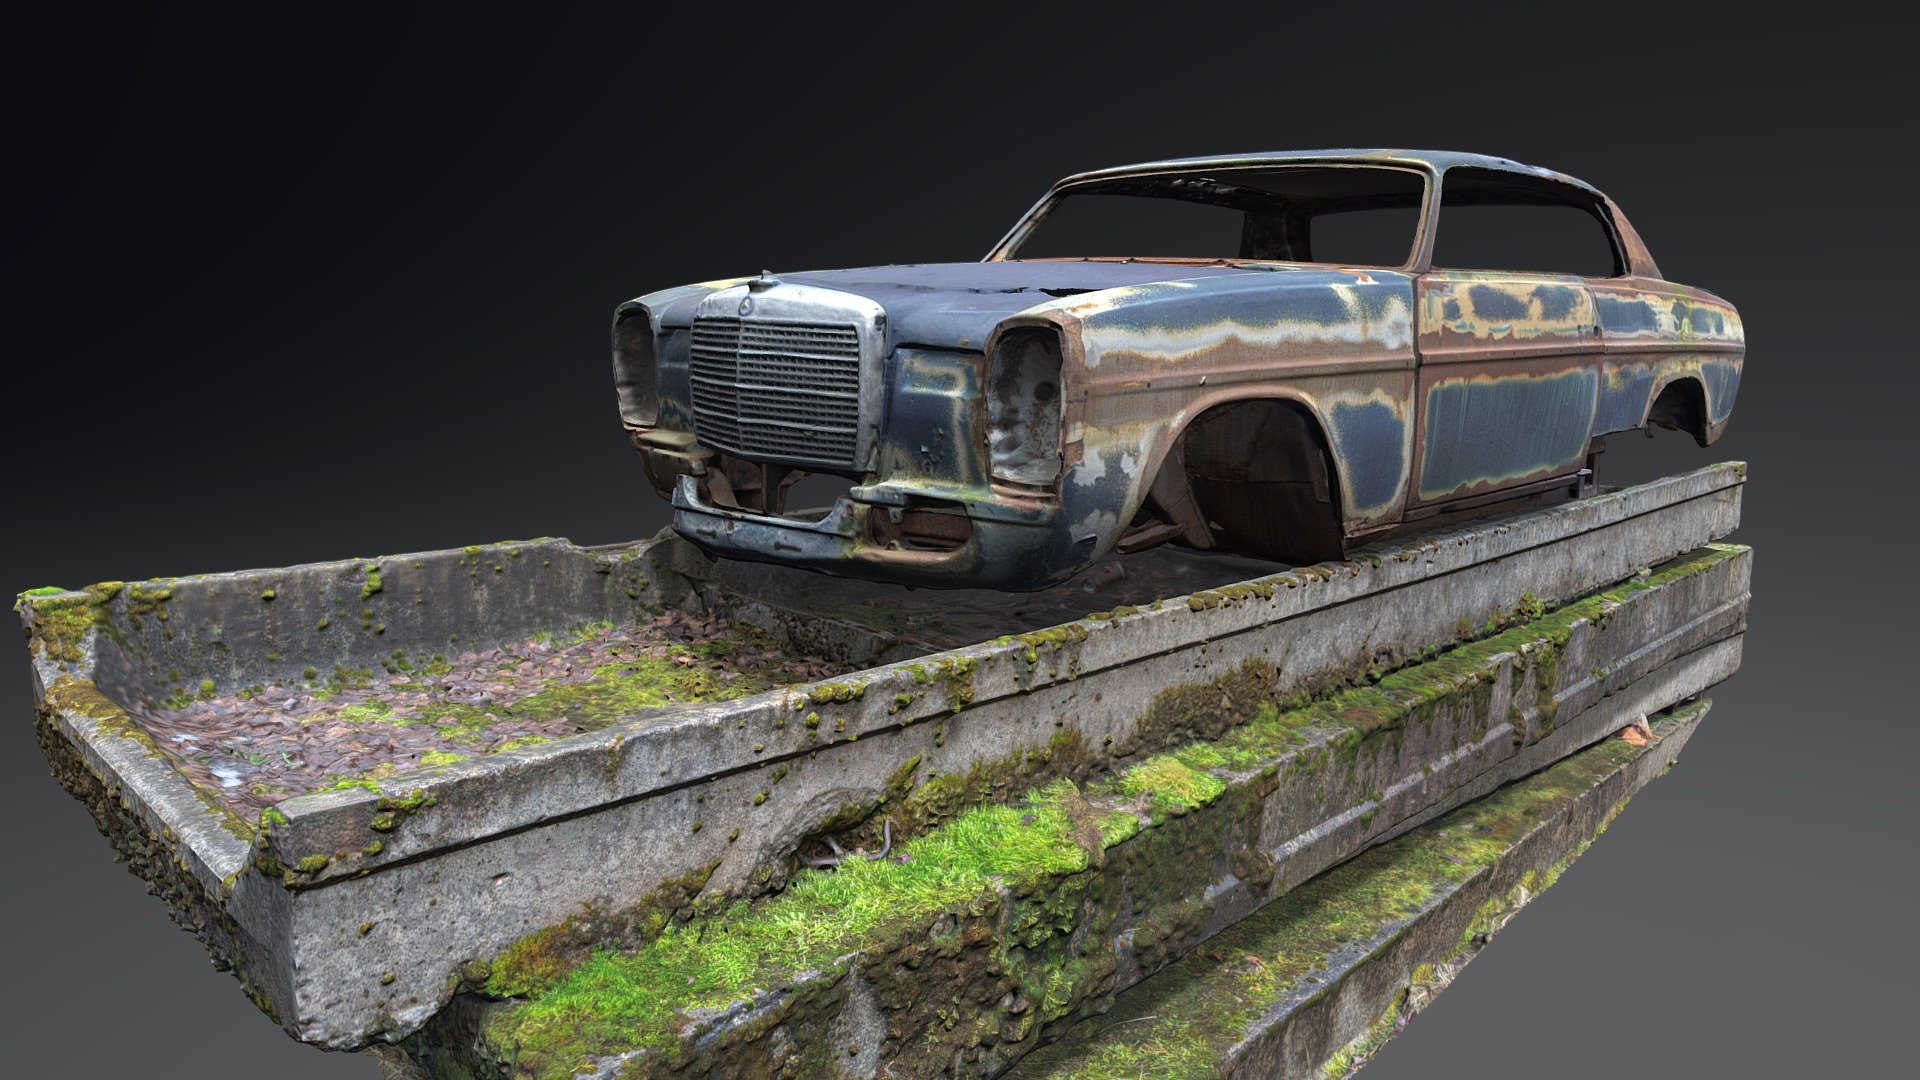 3D scan of a very old Mercedes wreck on some soviet industrial blocks.
No wheels, rusty, looks burned.
With normal map 3d model